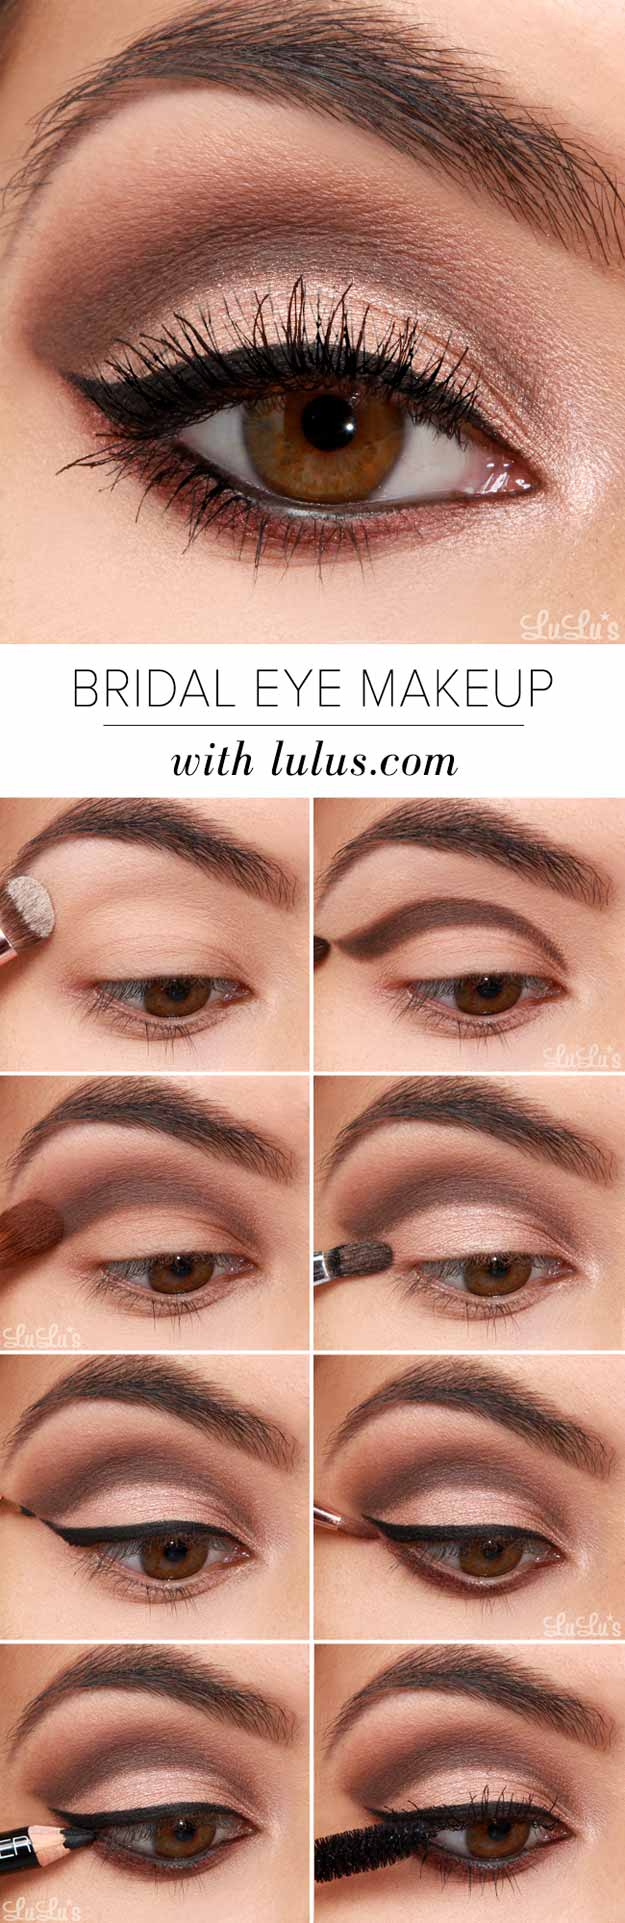 Eye Makeup Tips For Green Eyes And Brown Hair 30 Wedding Makeup For Brown Eyes The Goddess